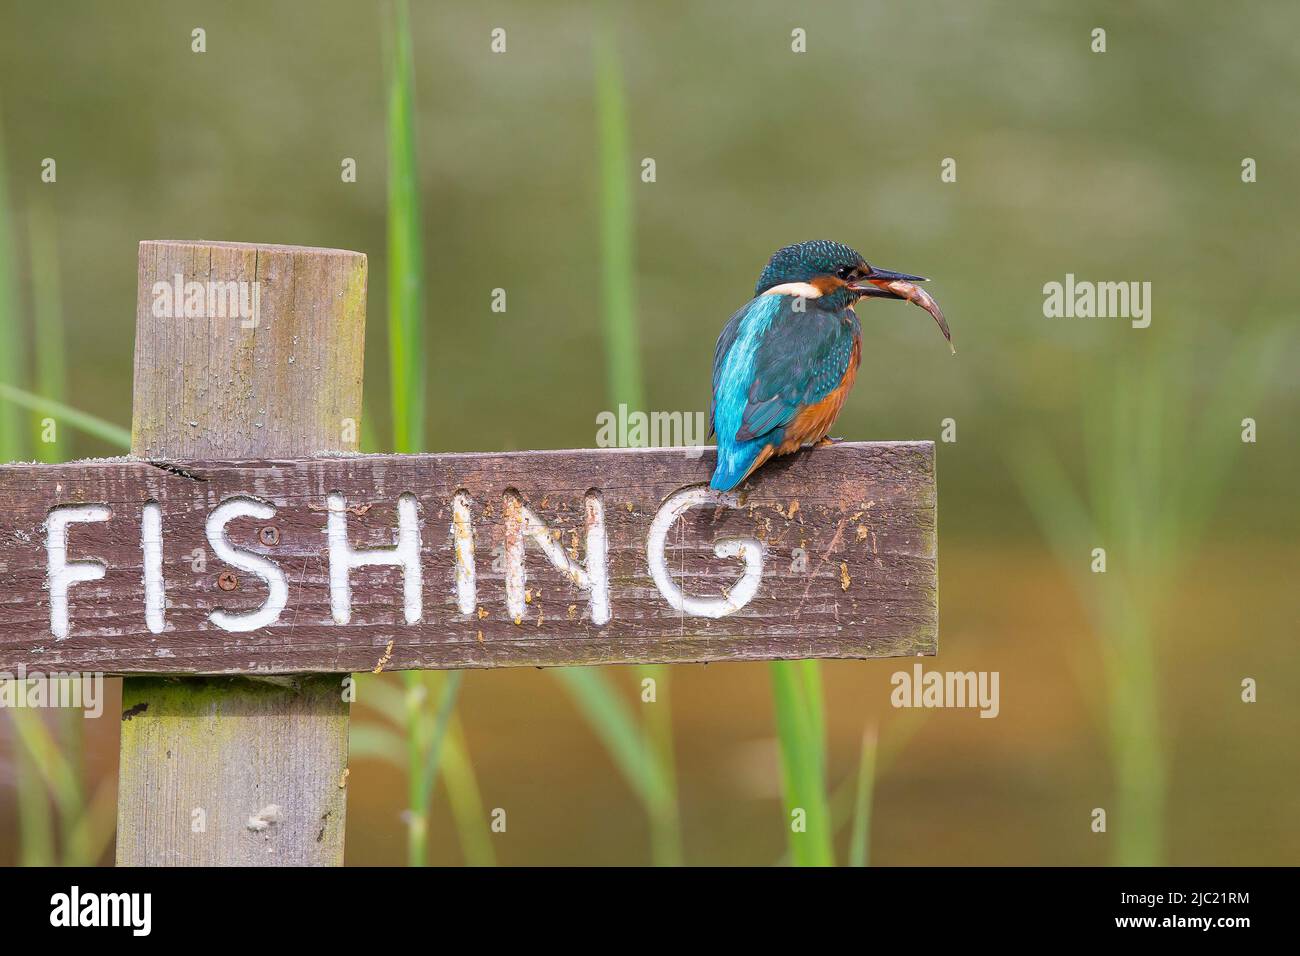 Kidderminster, UK. 9th June. 2022. UK weather: with a sunny start, today is a perfect day for a spot of fishing. A slight breeze keeps this kingfisher on his toes  as he indulges in a little fishing. A kingfisher bird plays with a fish while perched on a 'no fishing' sign post before devouring his meal in one gulp. Credit: Lee Hudson/Alamy Live News Stock Photo